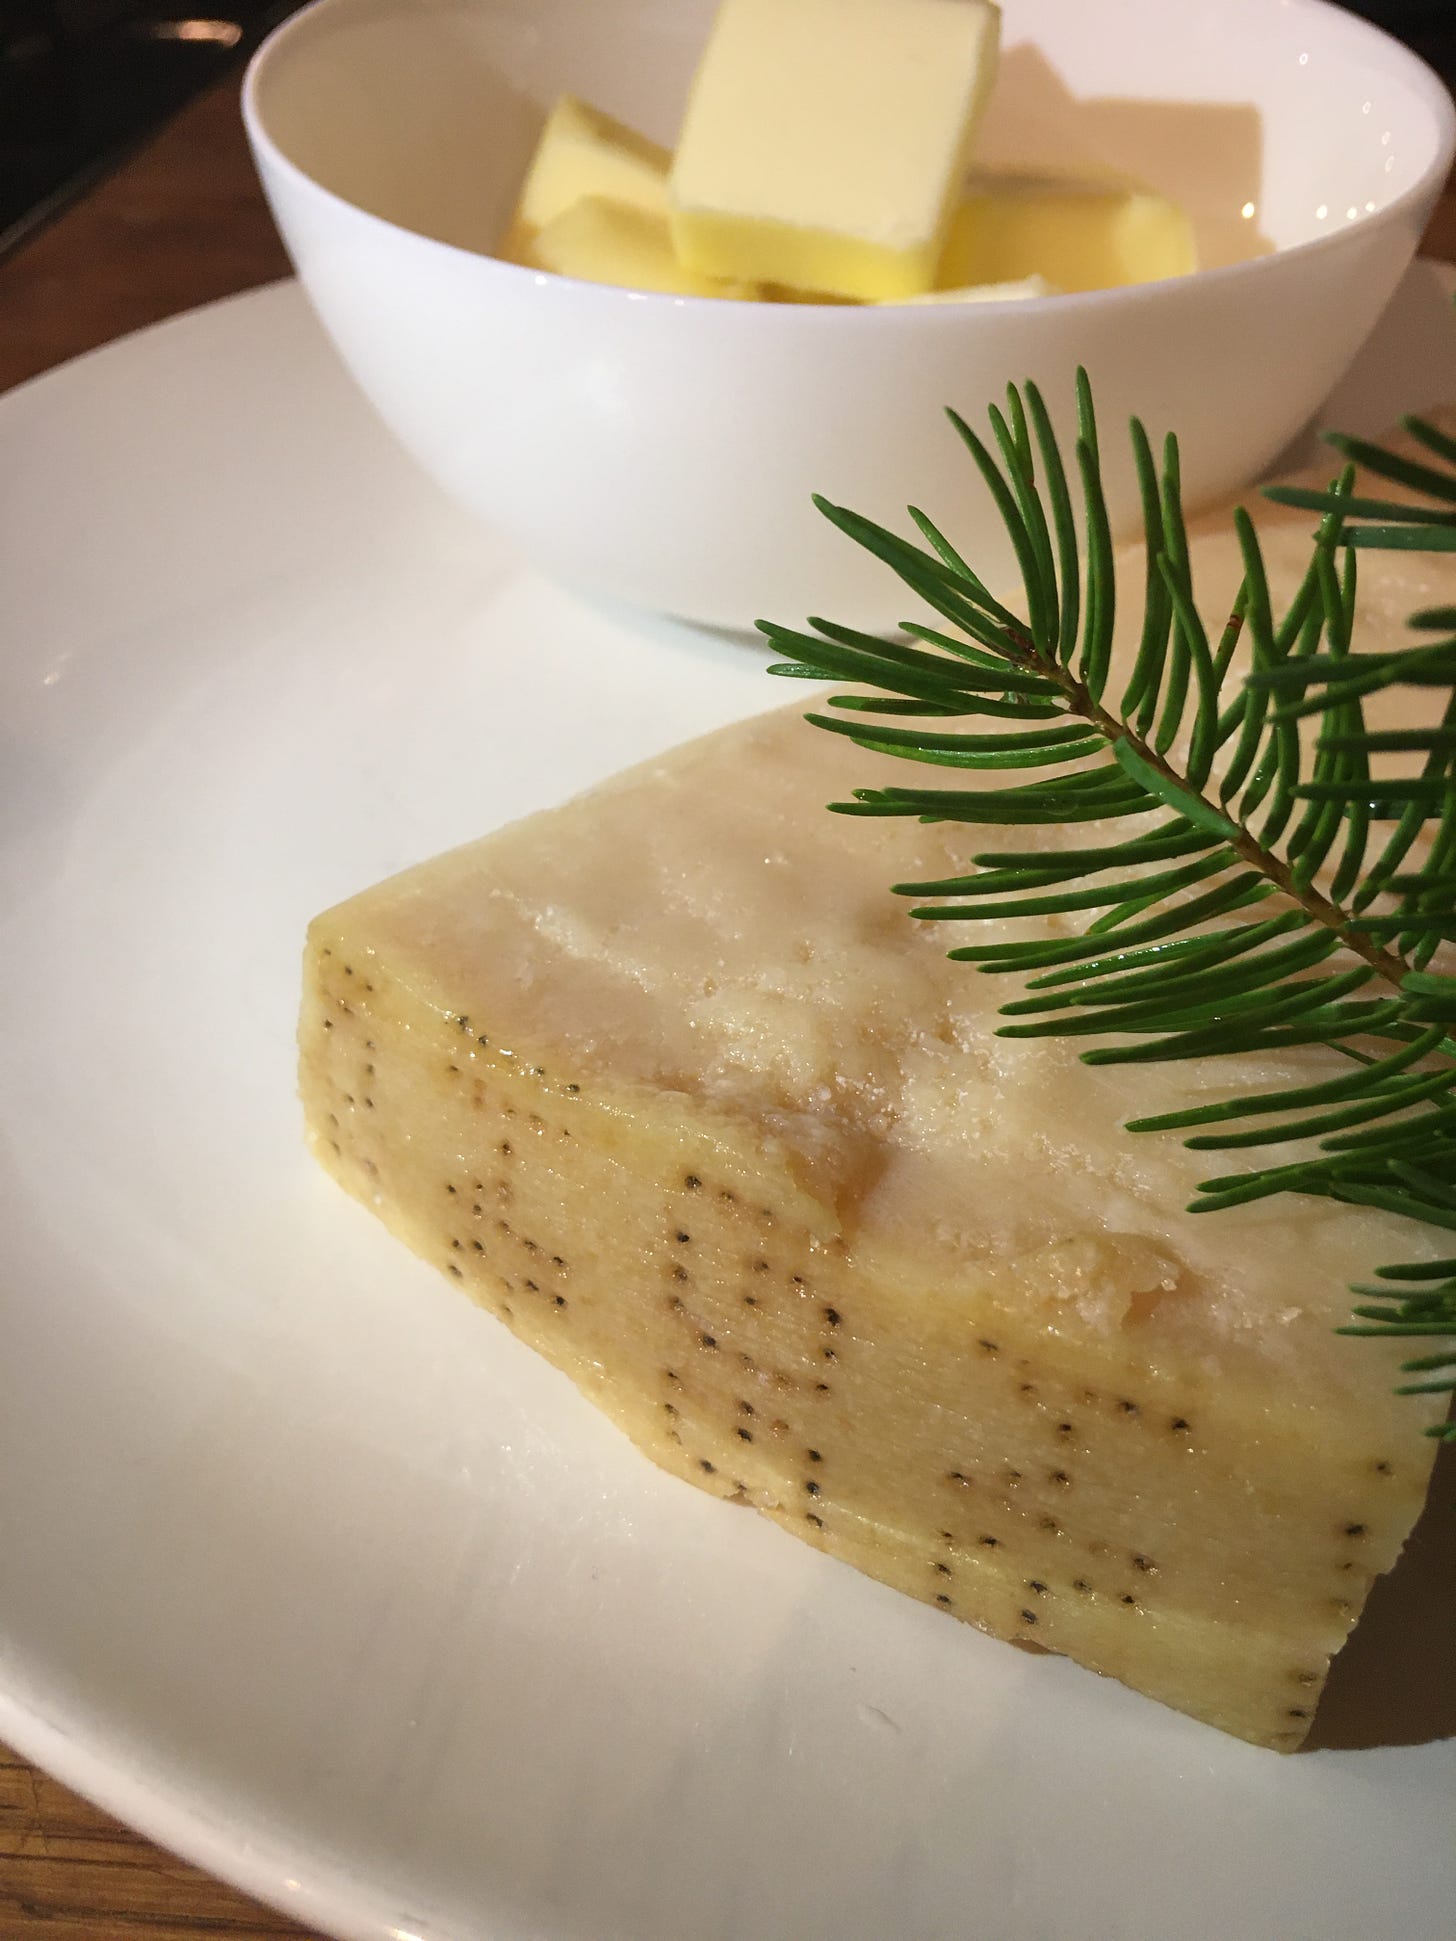 A mise en place with a white plate holding Parmigiano-Reggiano and a sprig of Douglas Fir. A white bowl holding cubed butter to make fettucine alfredo.